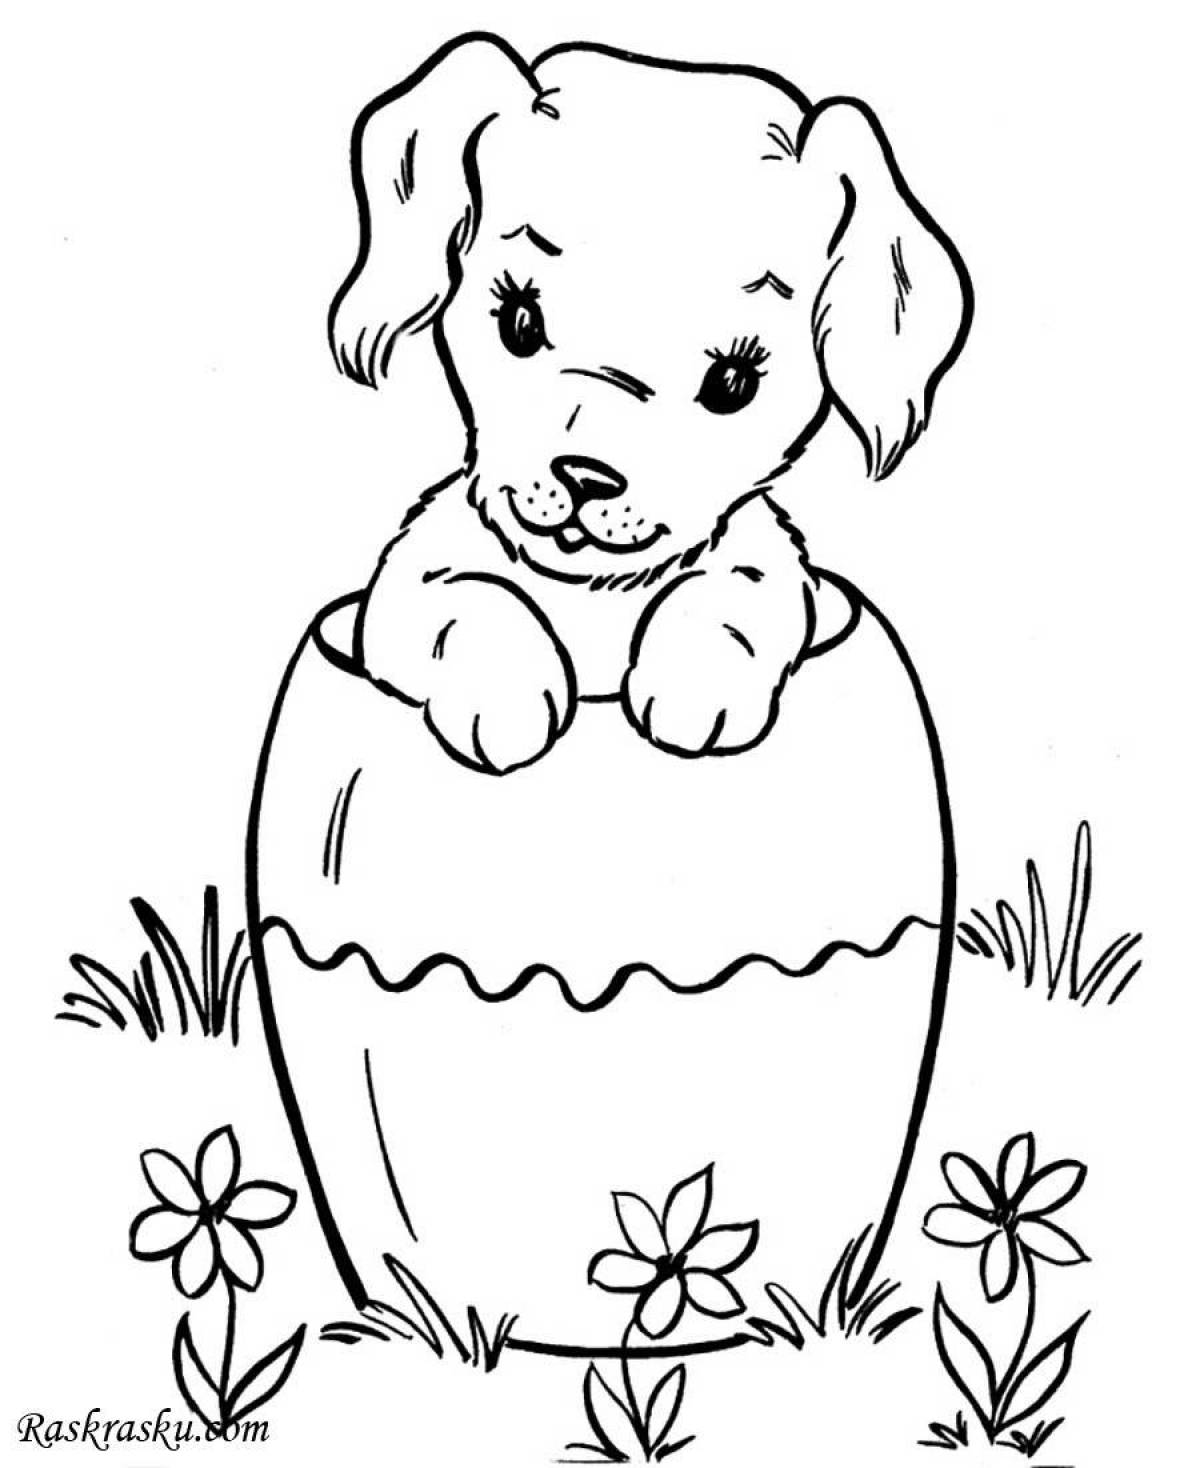 Fabulous dog coloring book for children 6-7 years old